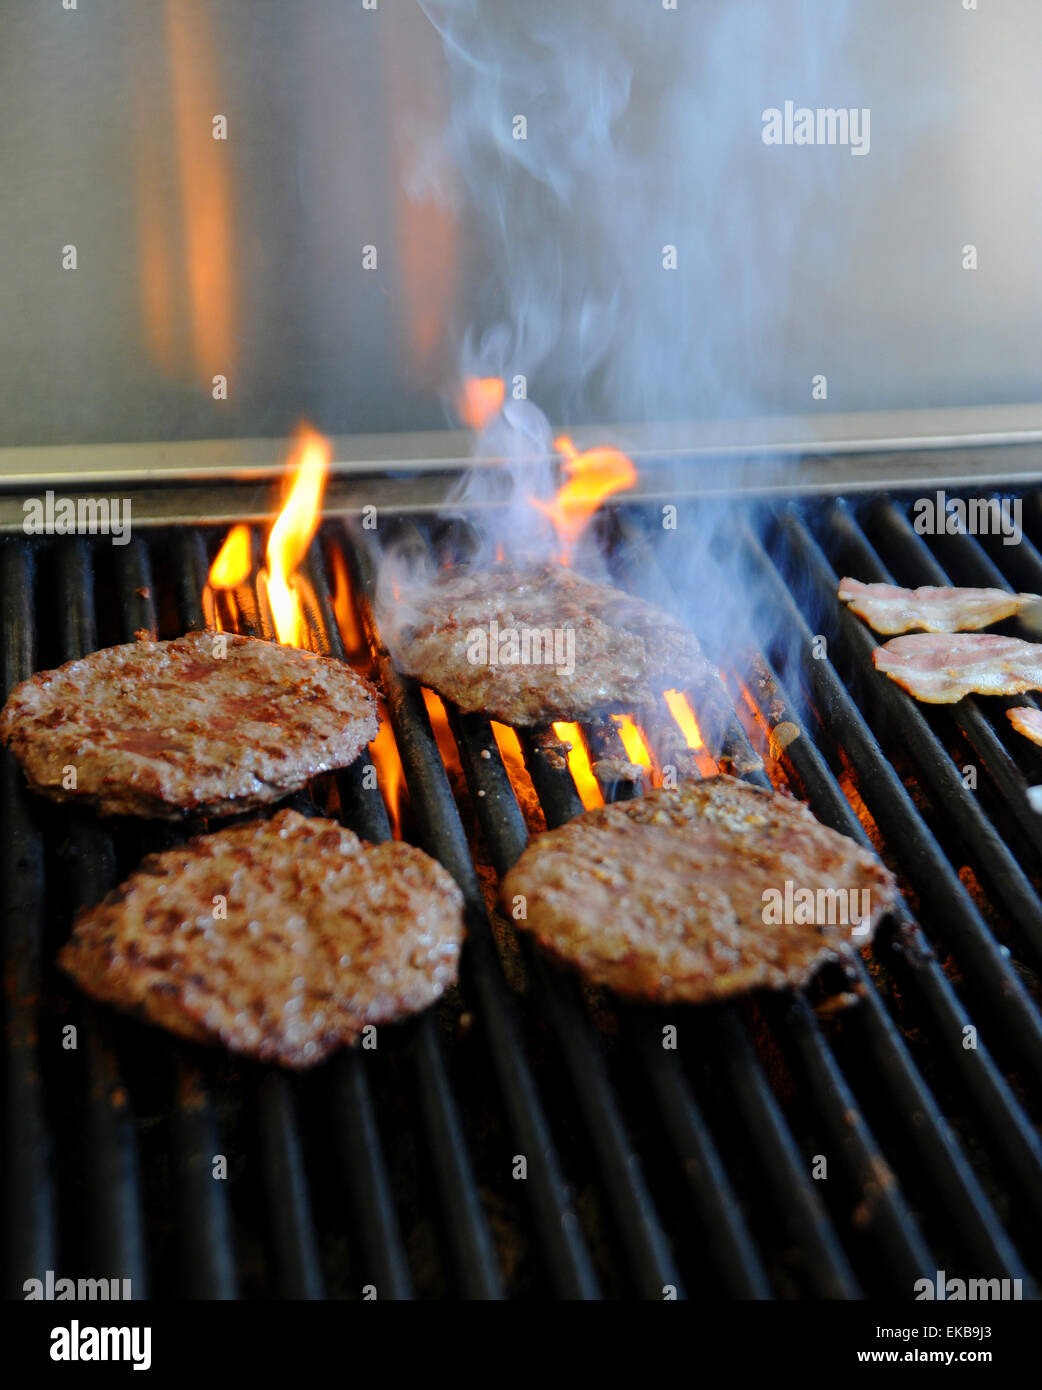 Freshly made beef burgers cooking on a hot griddle at a fast food take away shop Stock Photo